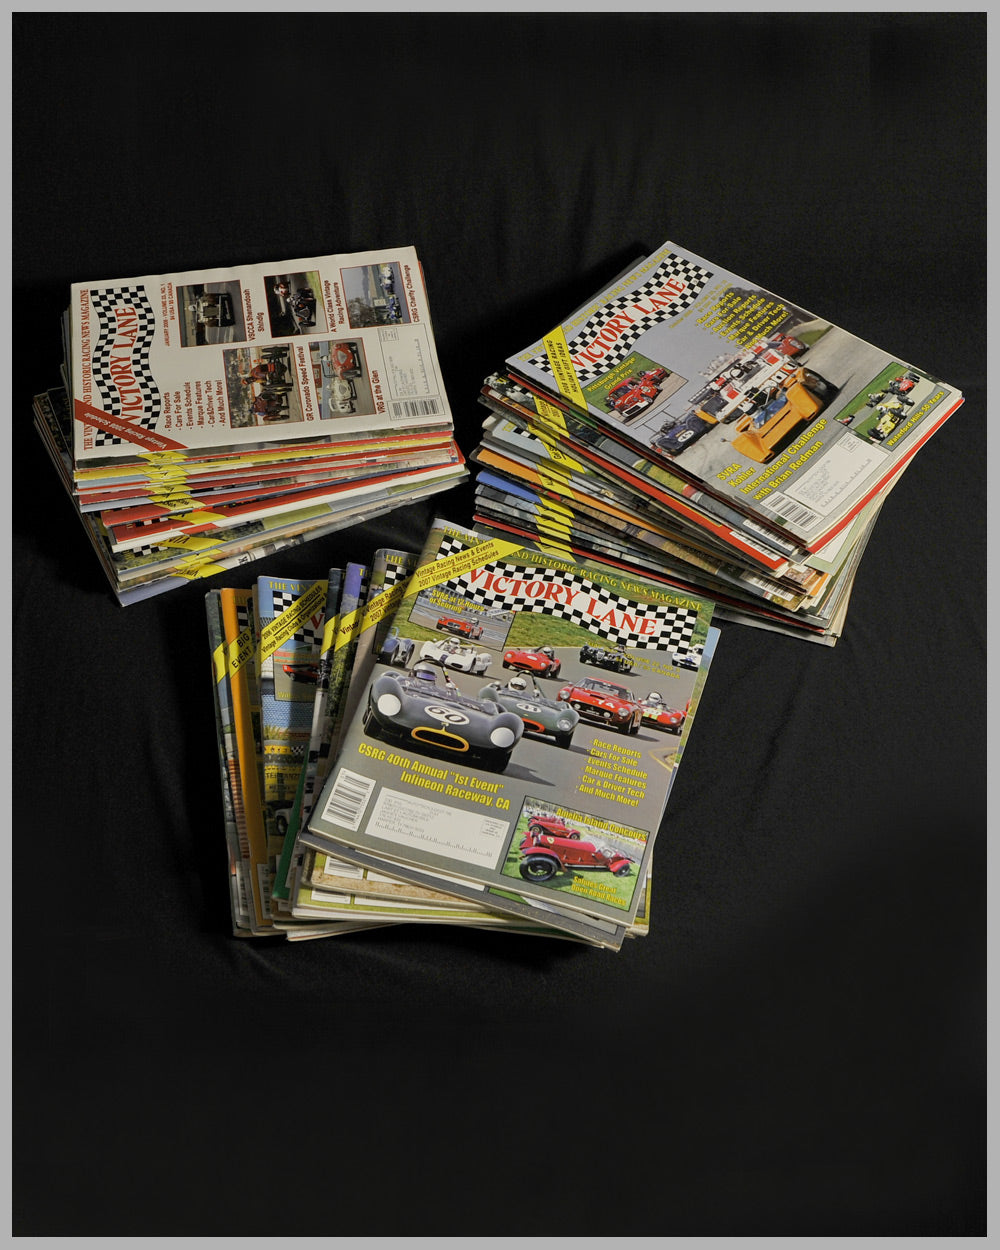 Collection of 90 Victory Lane magazines from 2005 to 2015